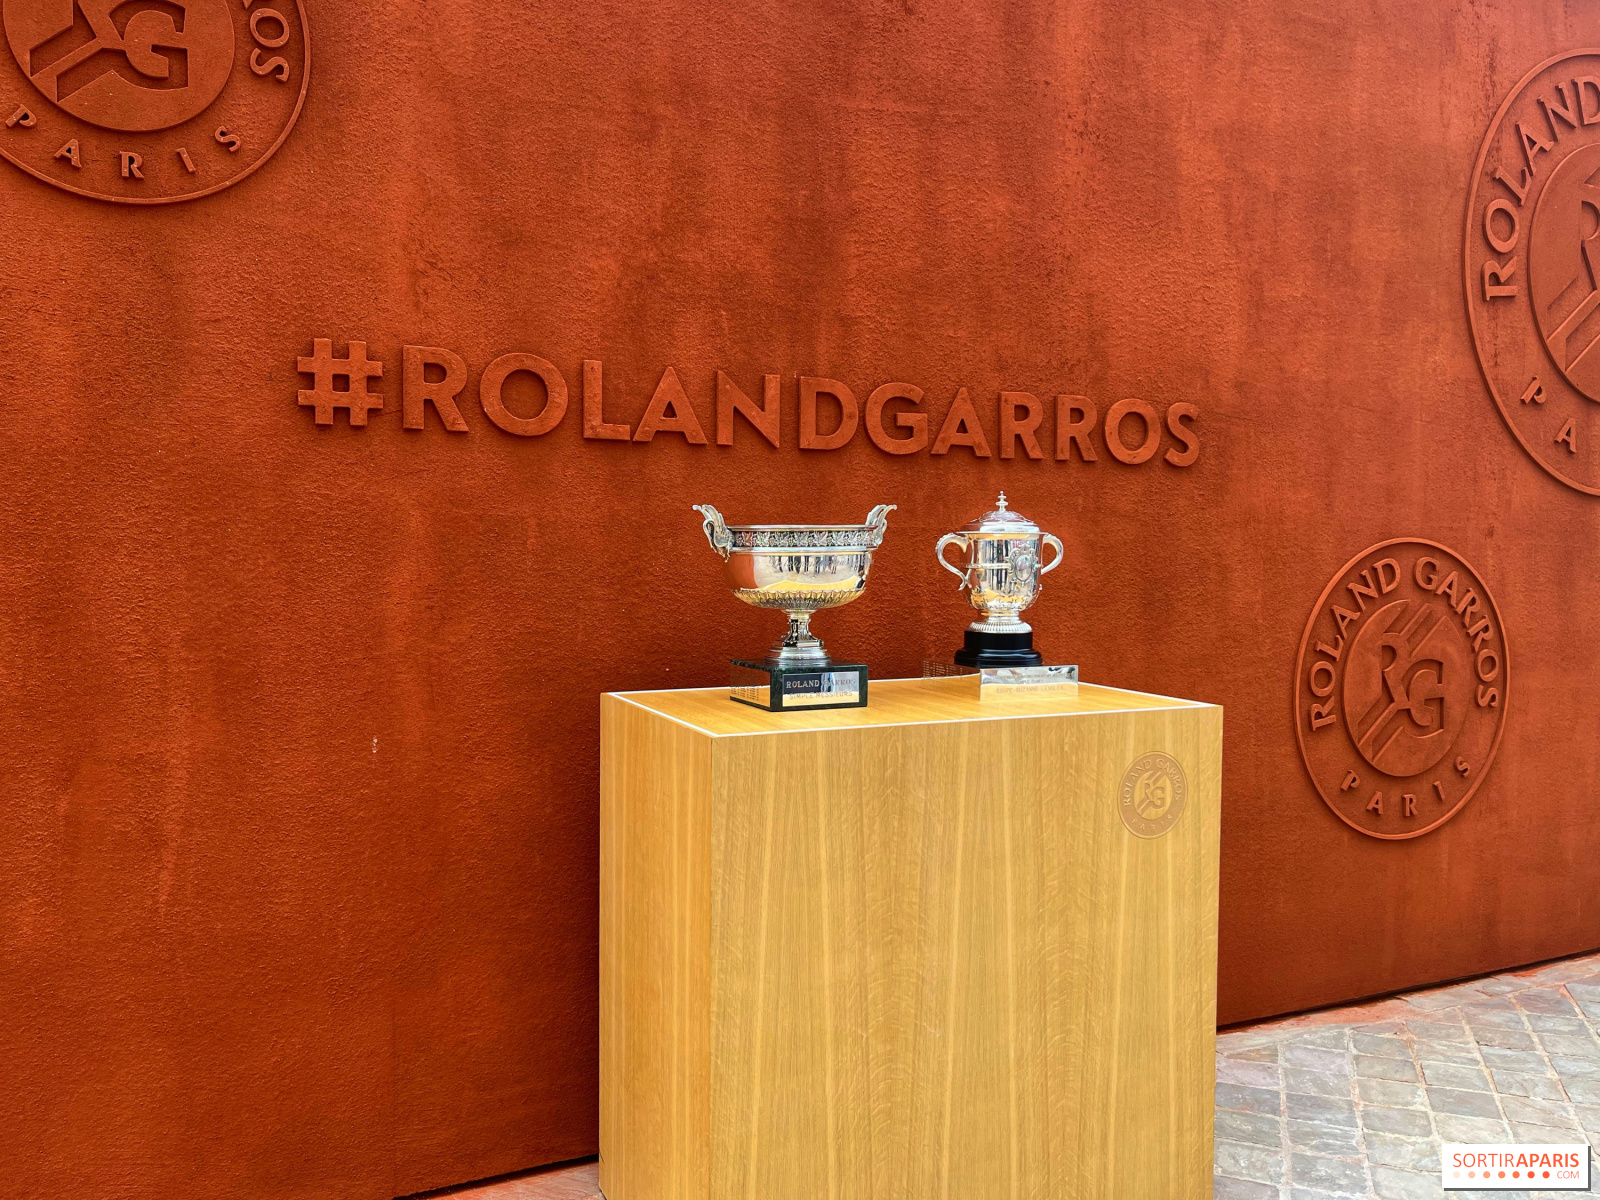 Roland-Garros 2023 Novak Djokovic takes on Casper Ruud in the final - where can you watch the match?